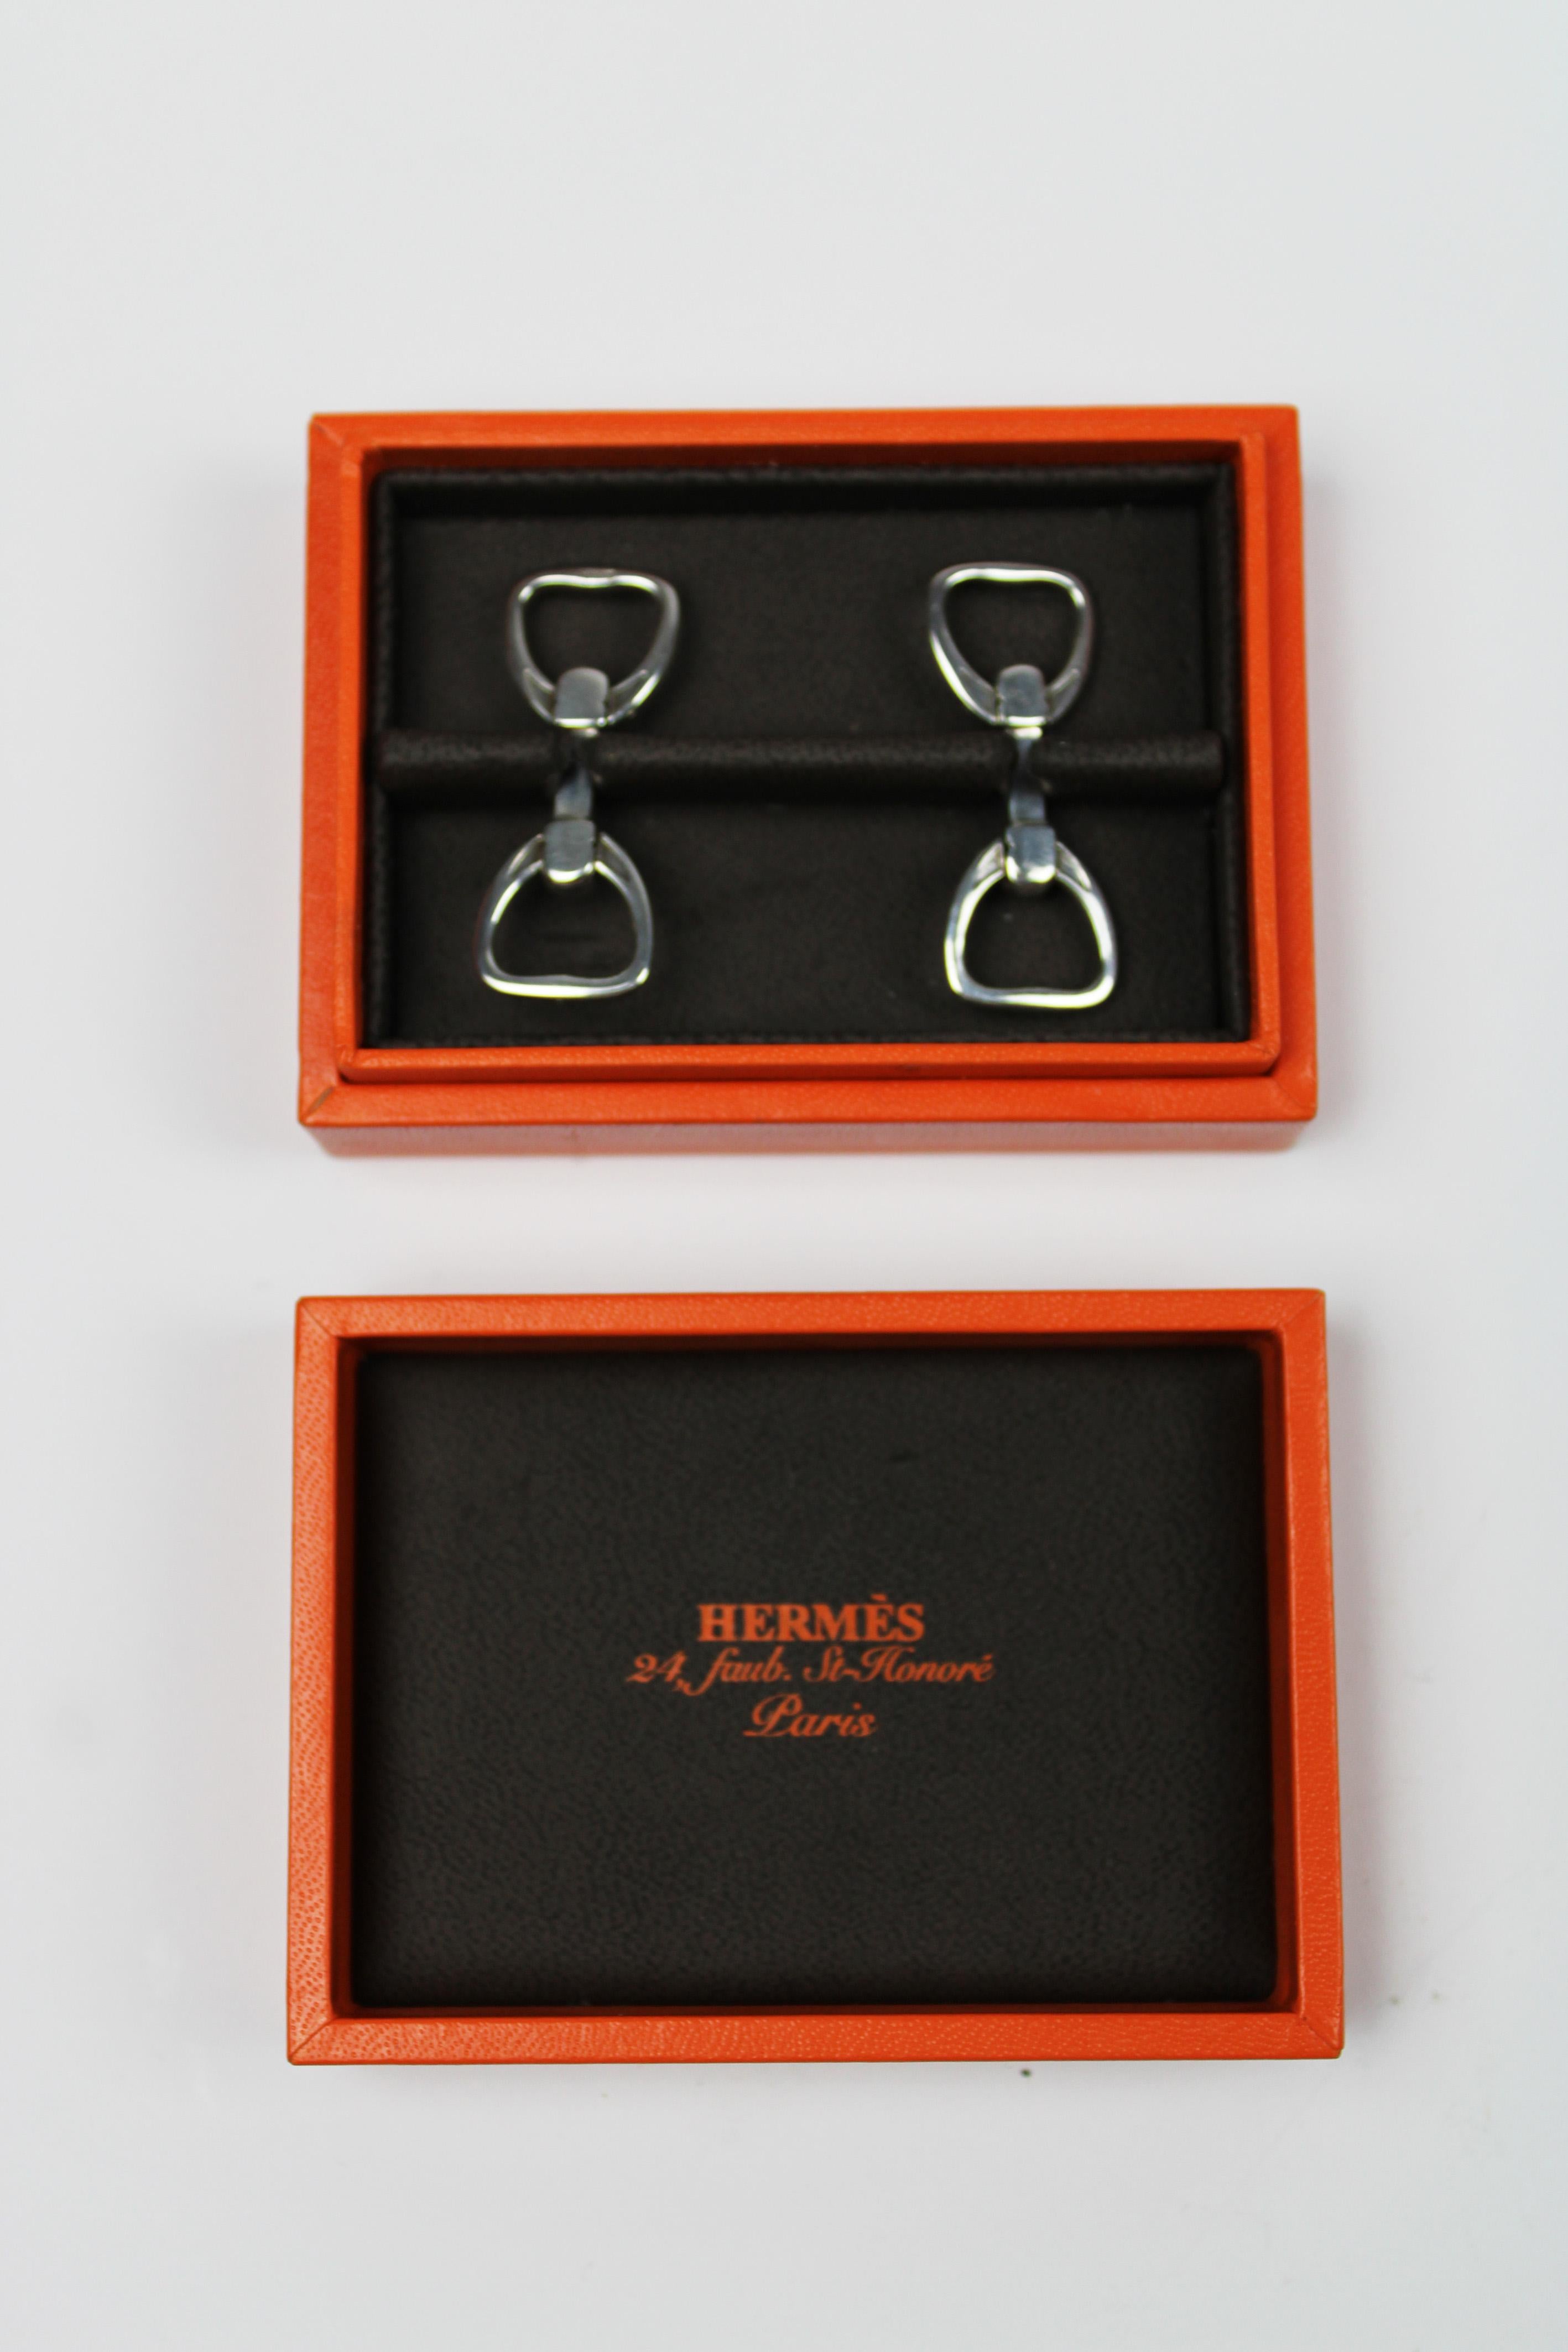 Introducing a pair of exquisite Hermès stirrup cufflinks crafted from sterling silver, accompanied by their original box. Made in the 21st century, these cufflinks epitomize the timeless elegance and meticulous artistry synonymous with the esteemed